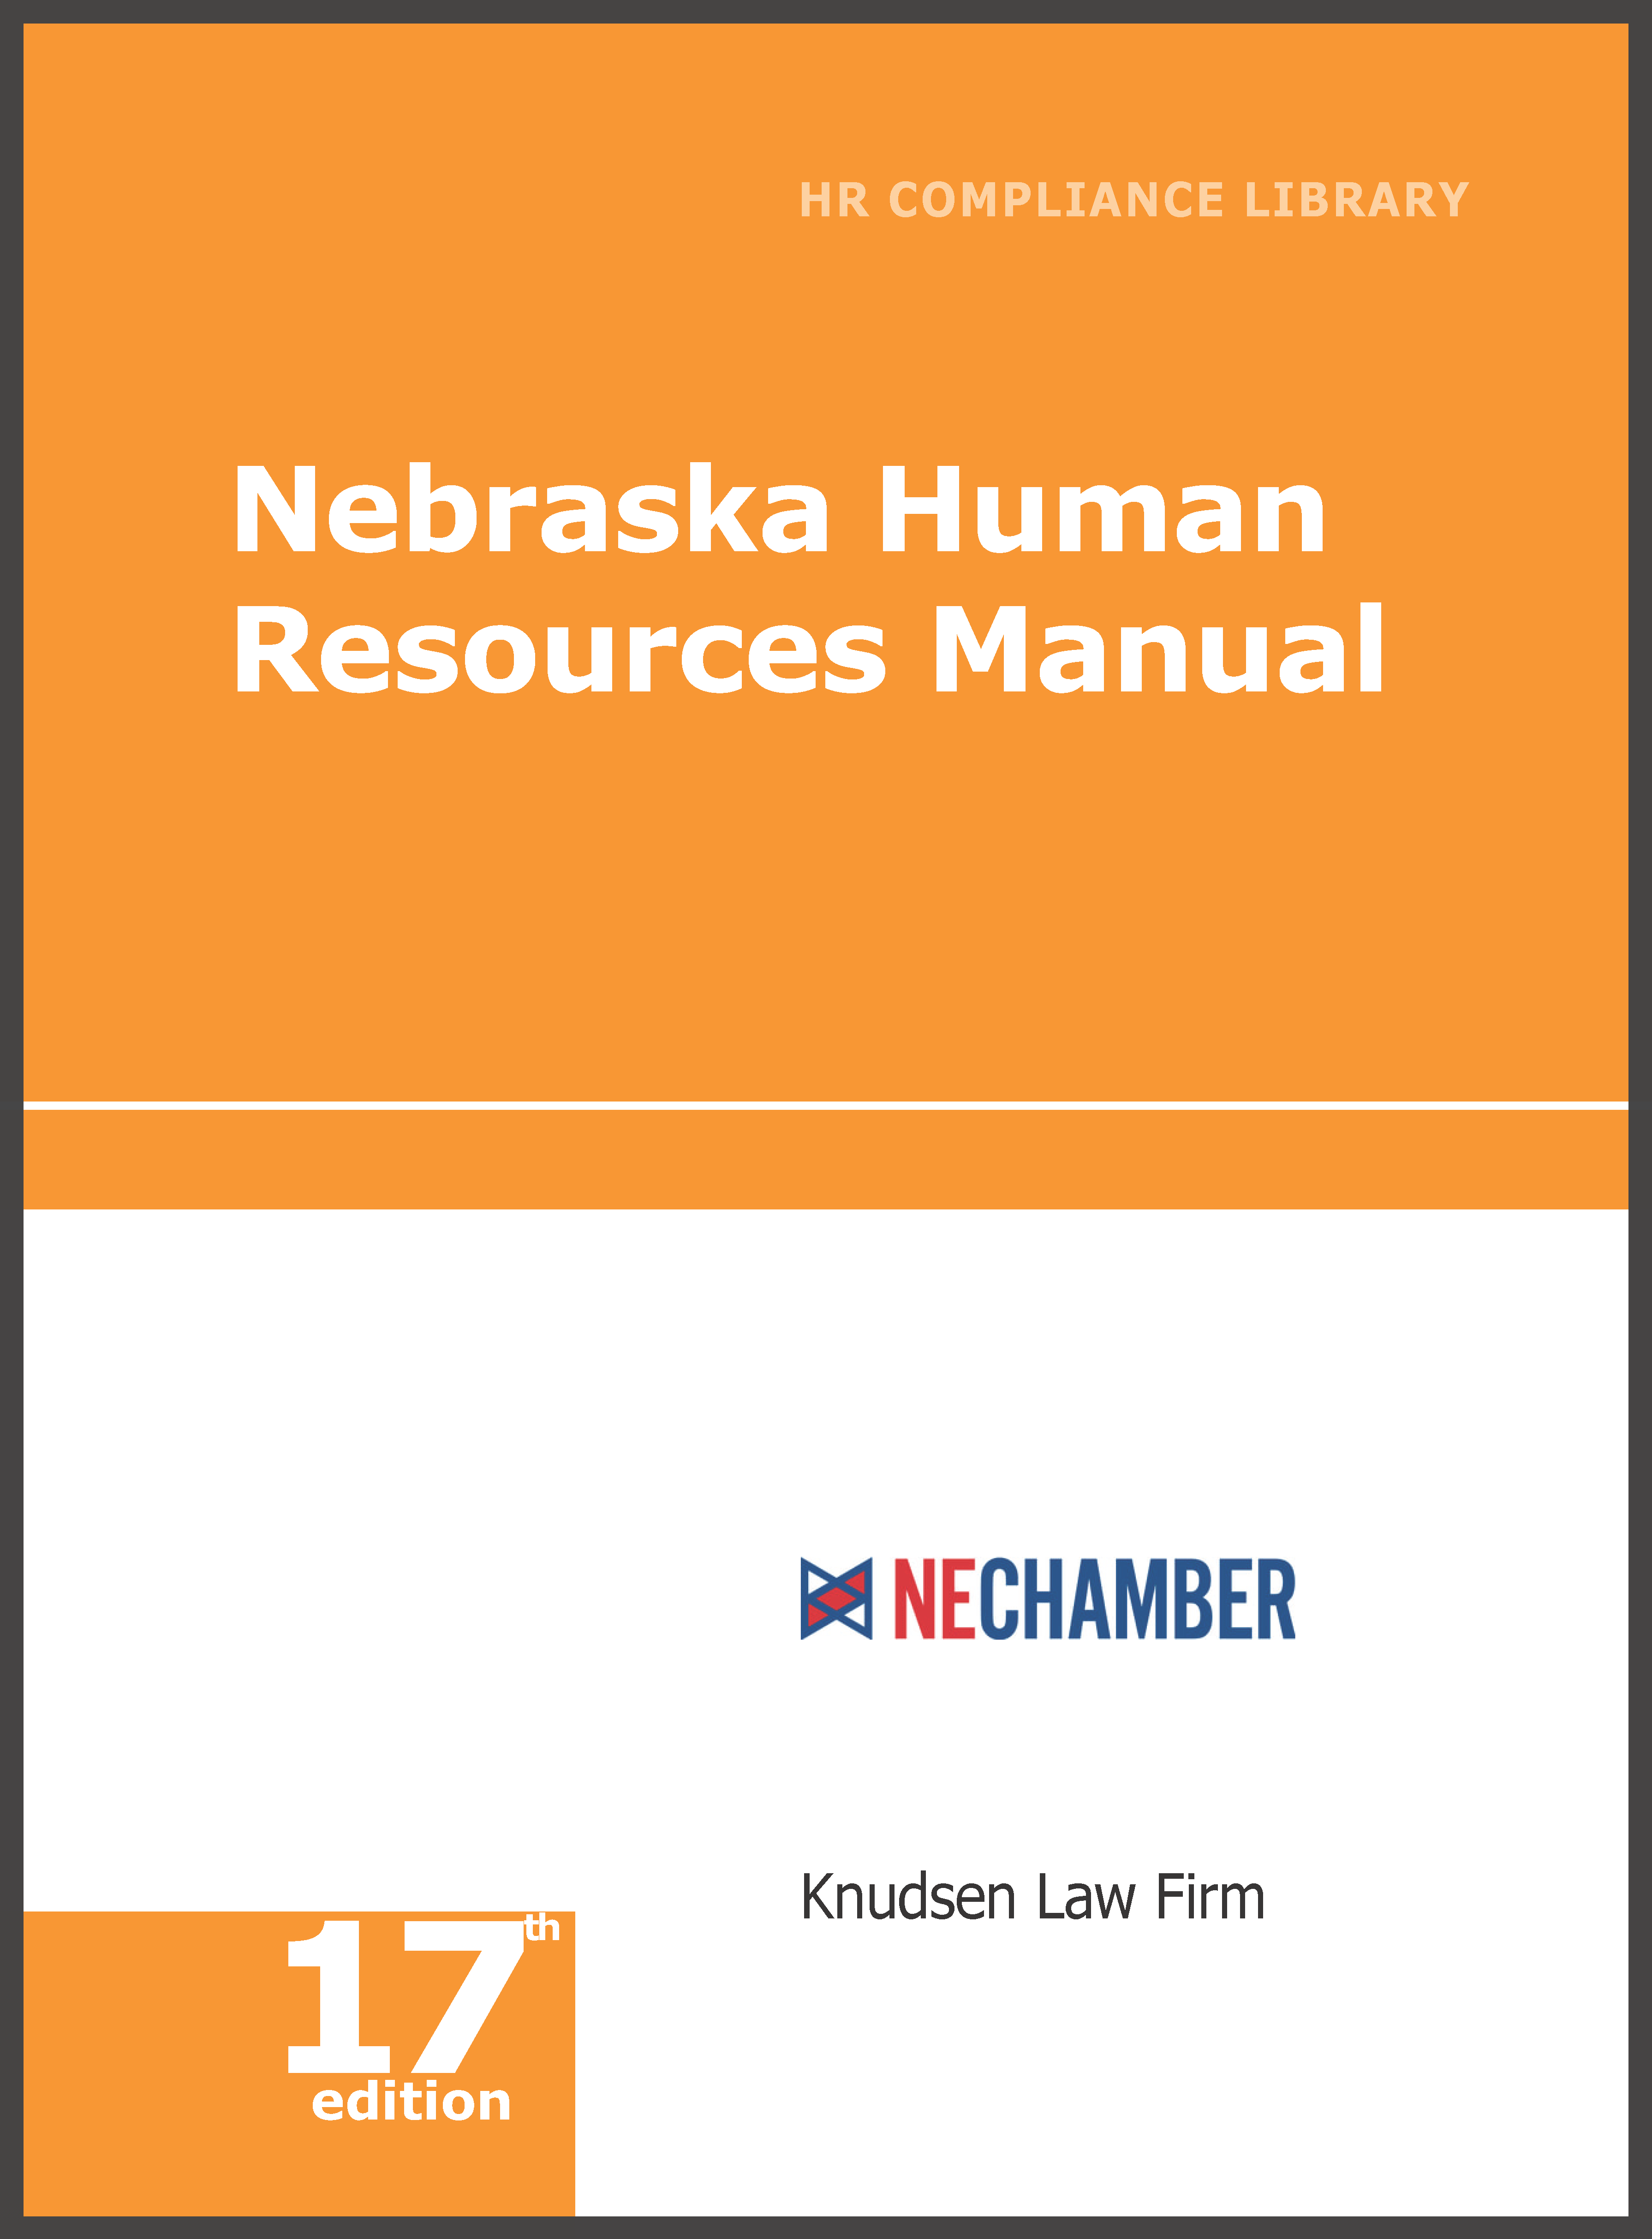 Nebraska Human Resources Library—Online Only employment law image, remote work, labor laws, employment laws, right to work, order of protection, minimum wage